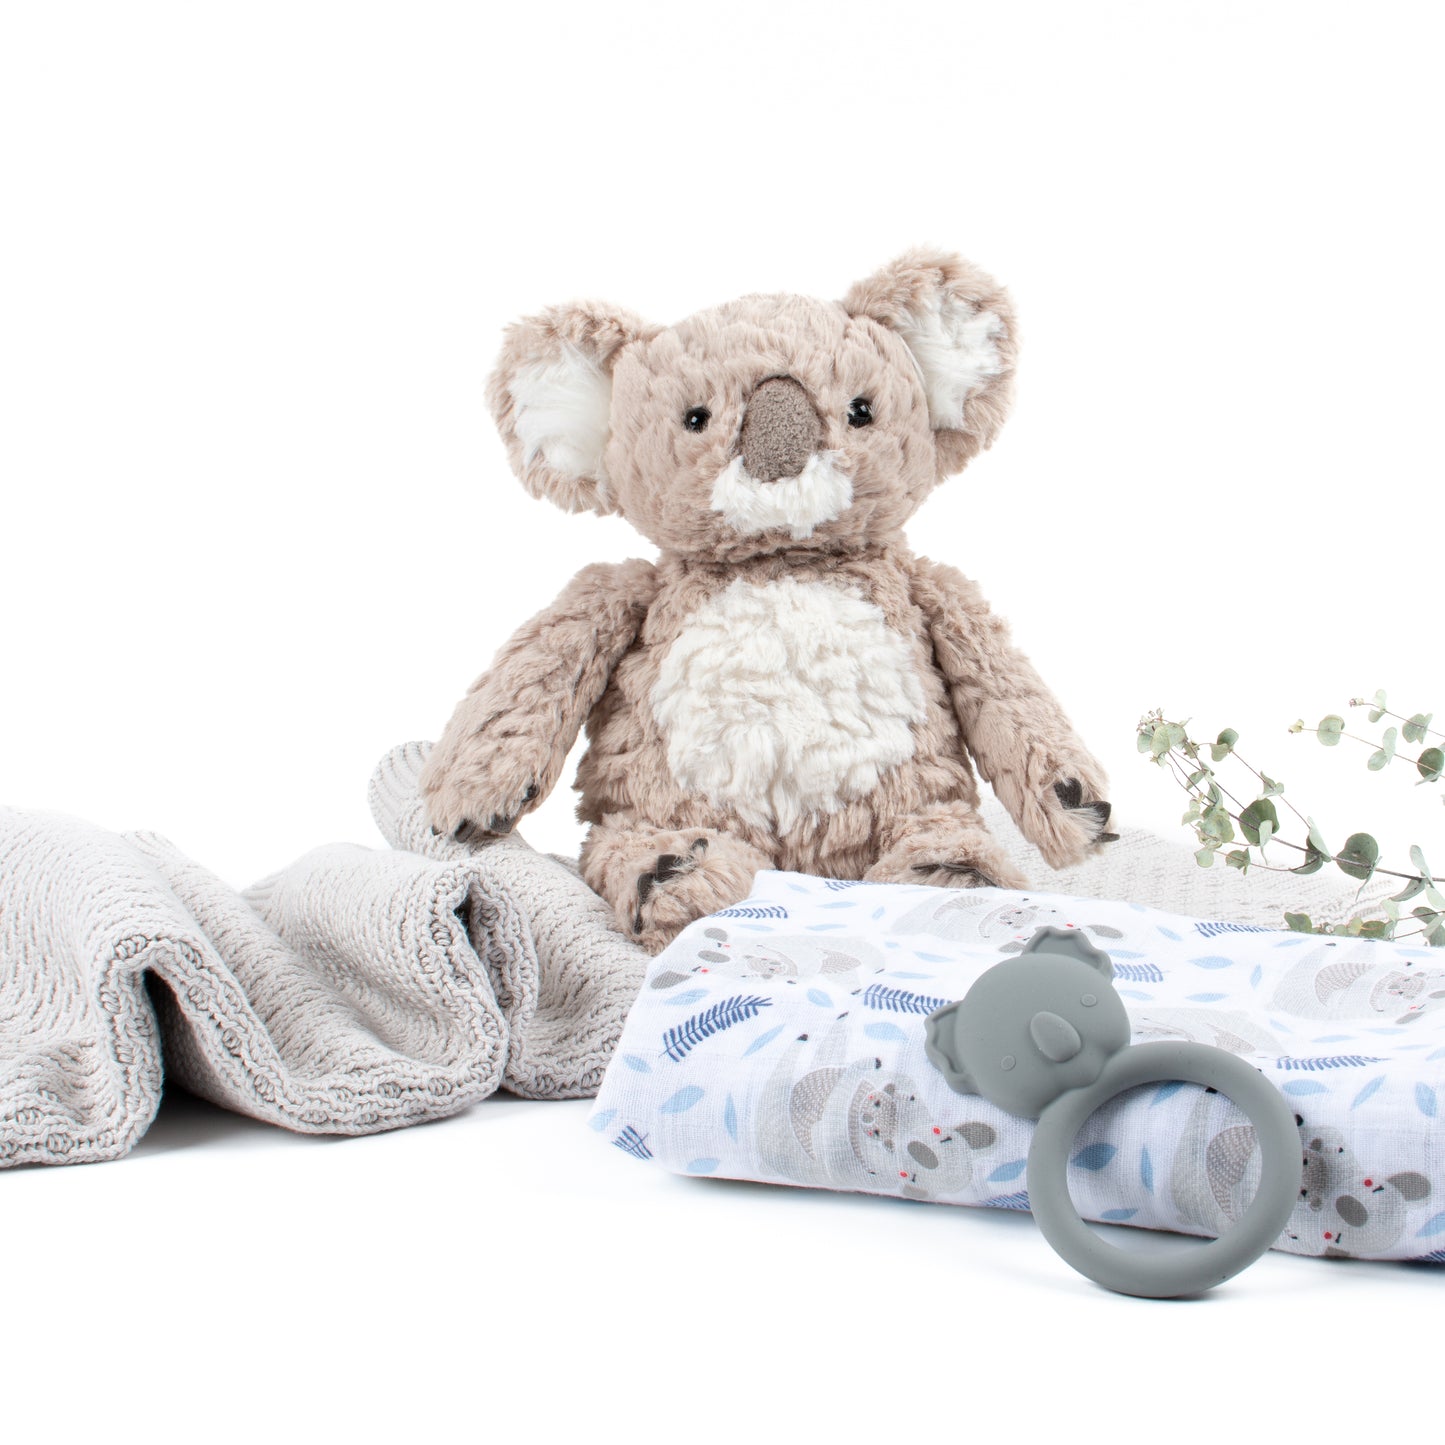 Out of Gift Box products shown are Putty Koala Bear, cotton swaddle and Blanket and silicone teether by Mushie.